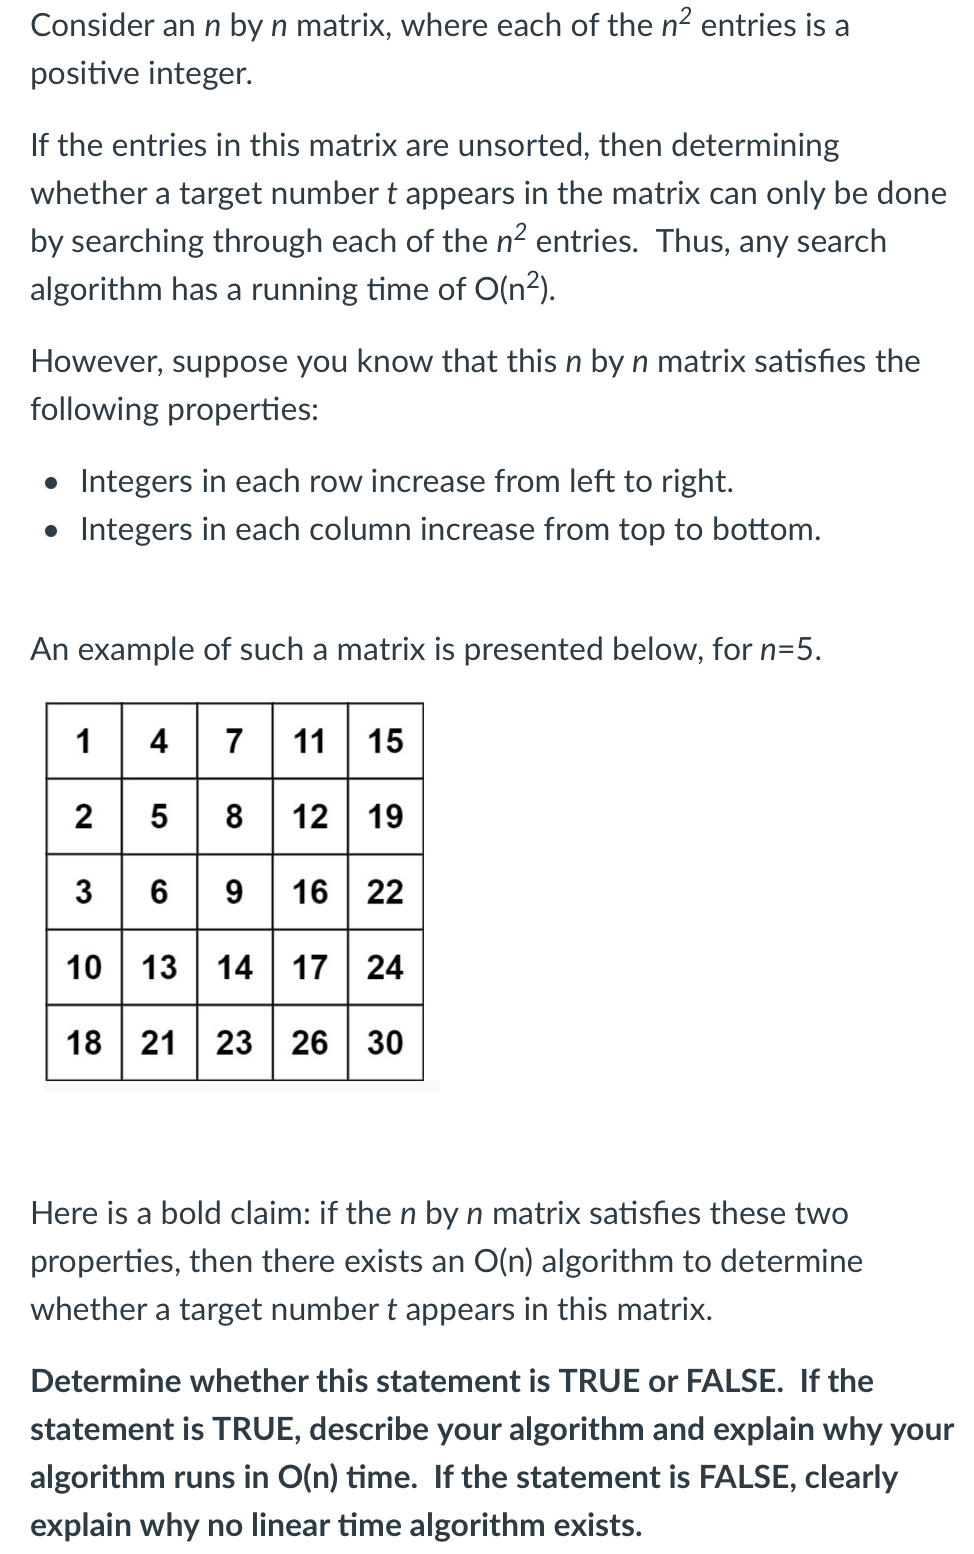 Consider an n by n matrix, where each of the n2 entries is a
positive integer.
If the entries in this matrix are unsorted, then determining
whether a target number t appears in the matrix can only be done
by searching through each of the n2 entries. Thus, any search
algorithm has a running time of O(n²).
However, suppose you know that this n by n matrix satisfies the
following properties:
• Integers in each row increase from left to right.
• Integers in each column increase from top to bottom.
An example of such a matrix is presented below, for n=5.
4 7 11 15
2 5 8 12 19
3 6 9 16 22
10 13 14 17 24
1
18 21 23 | 26 | 30
Here is a bold claim: if the n by n matrix satisfies these two
properties, then there exists an O(n) algorithm to determine
whether a target number t appears in this matrix.
Determine whether this statement is TRUE or FALSE. If the
statement is TRUE, describe your algorithm and explain why your
algorithm runs in O(n) time. If the statement is FALSE, clearly
explain why no linear time algorithm exists.
